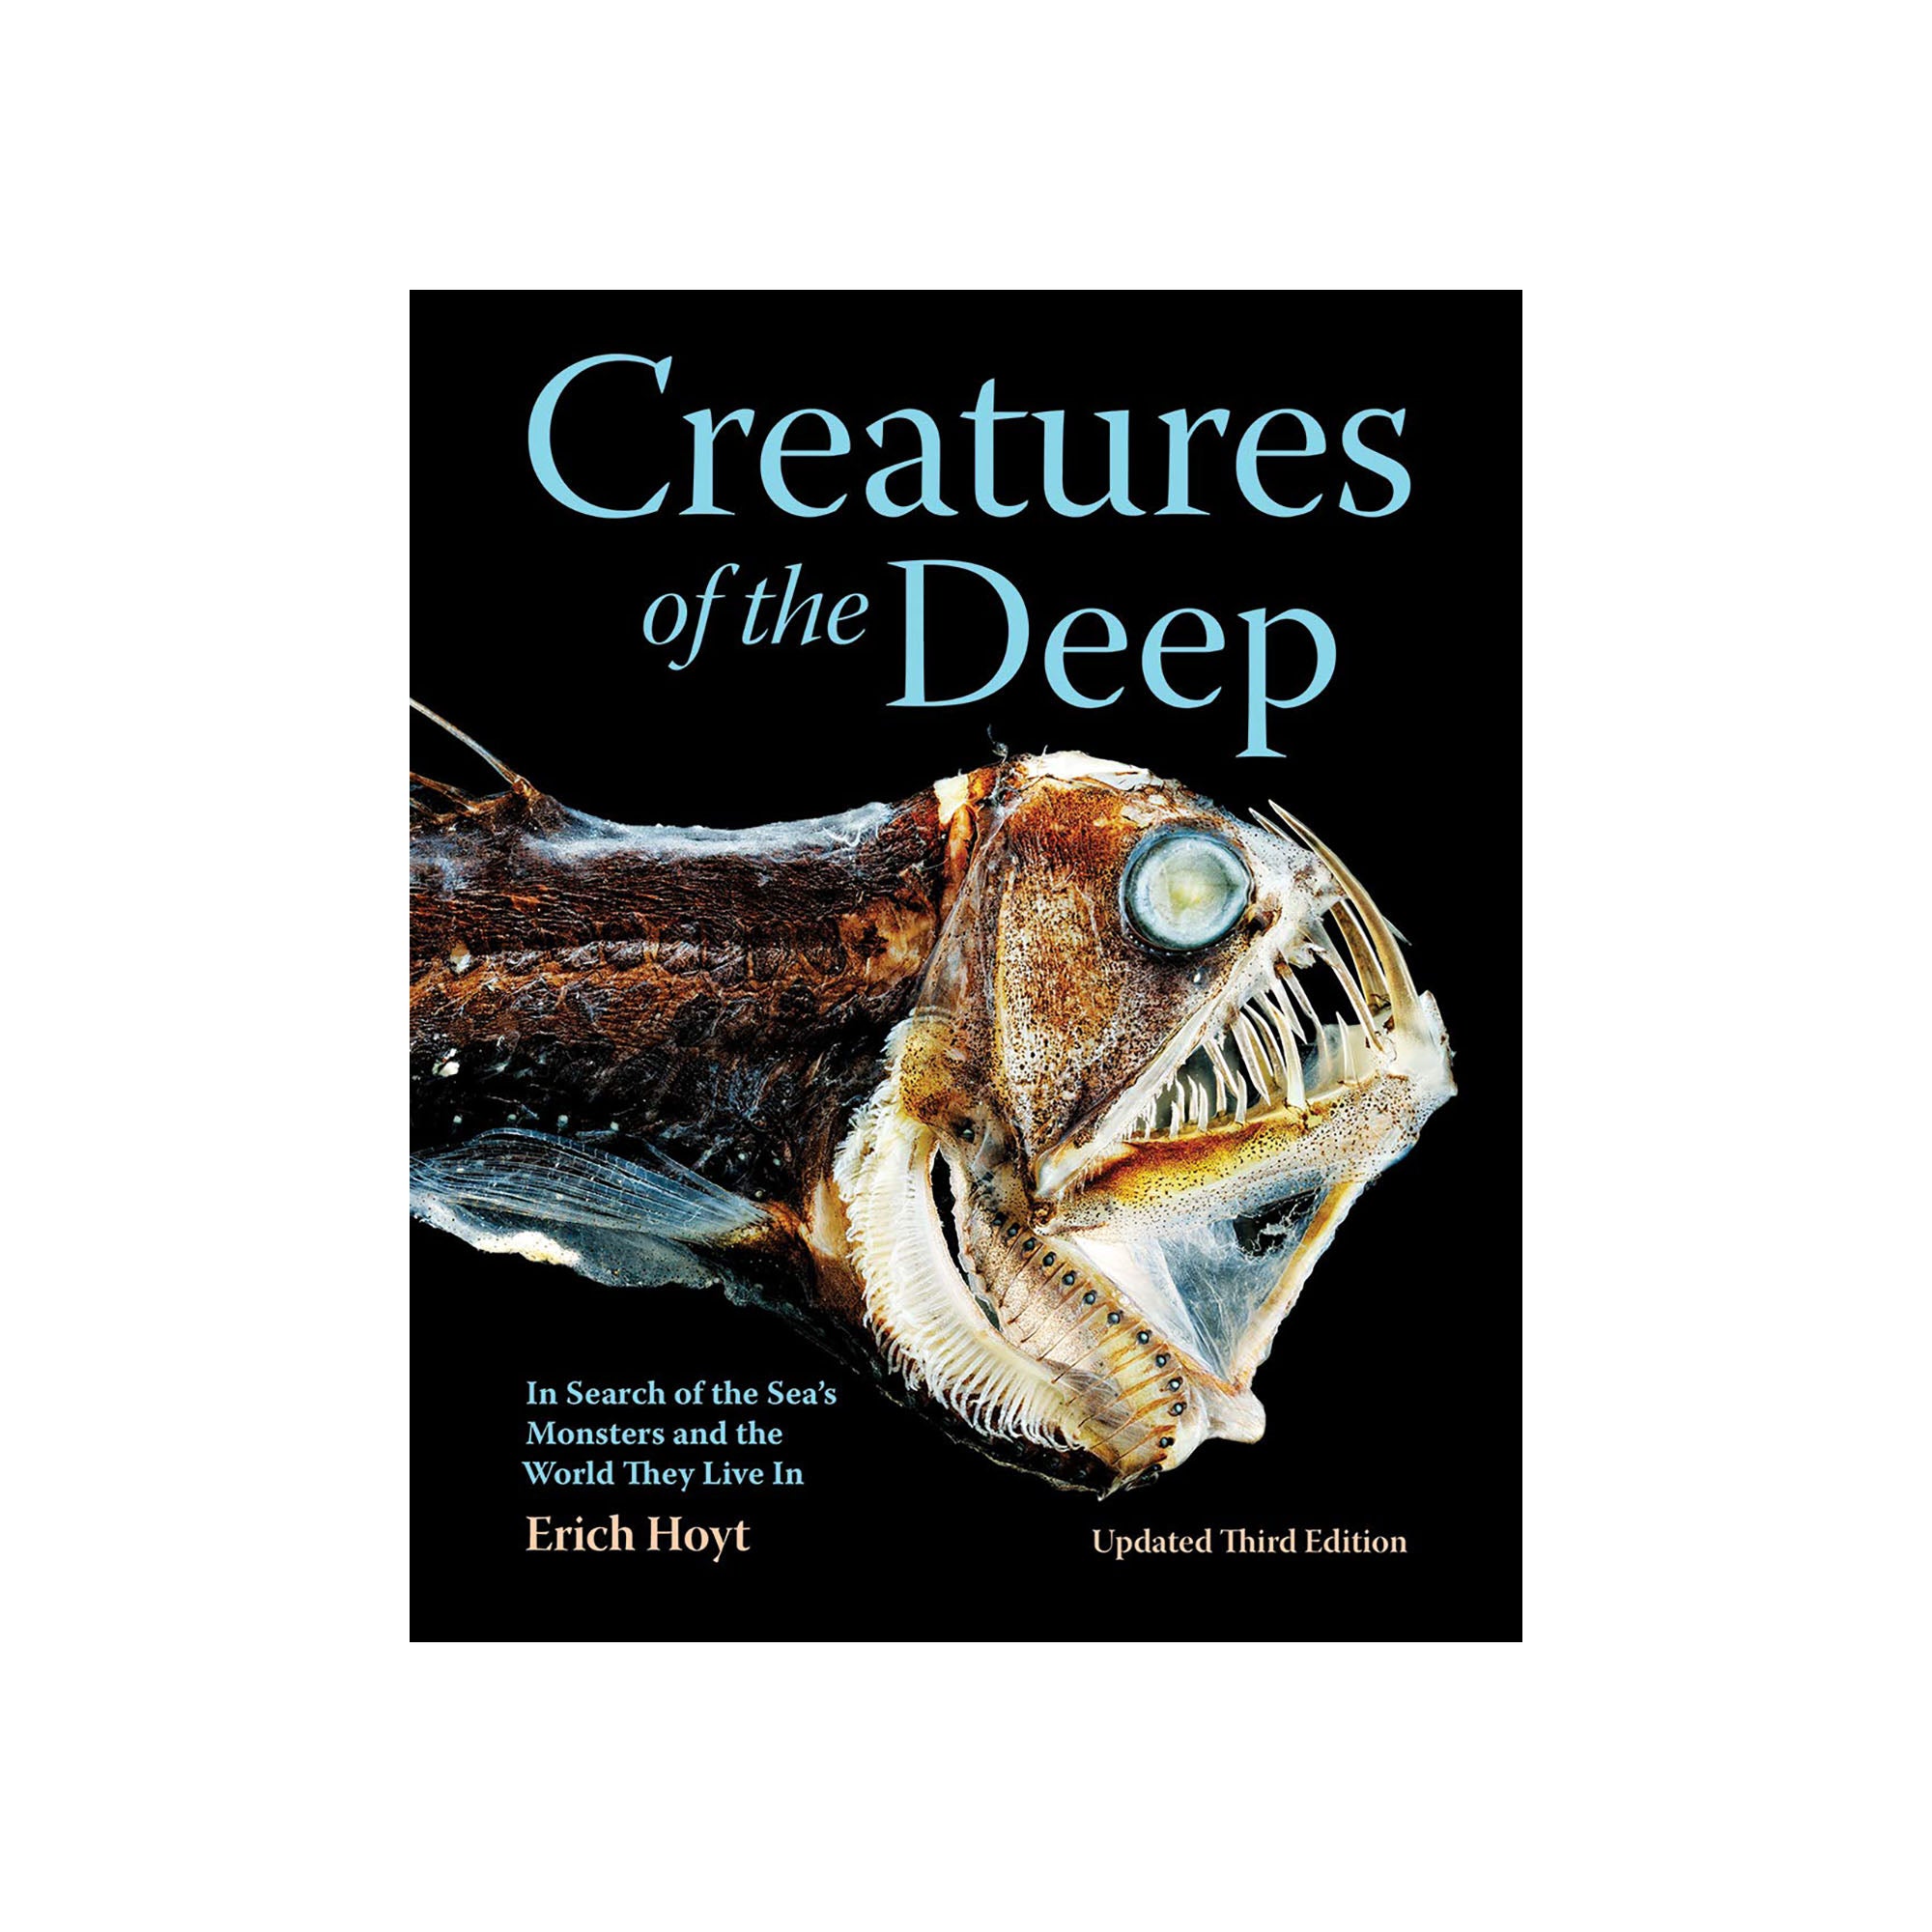 FIREFLY'S CREATURES OF THE DEEP